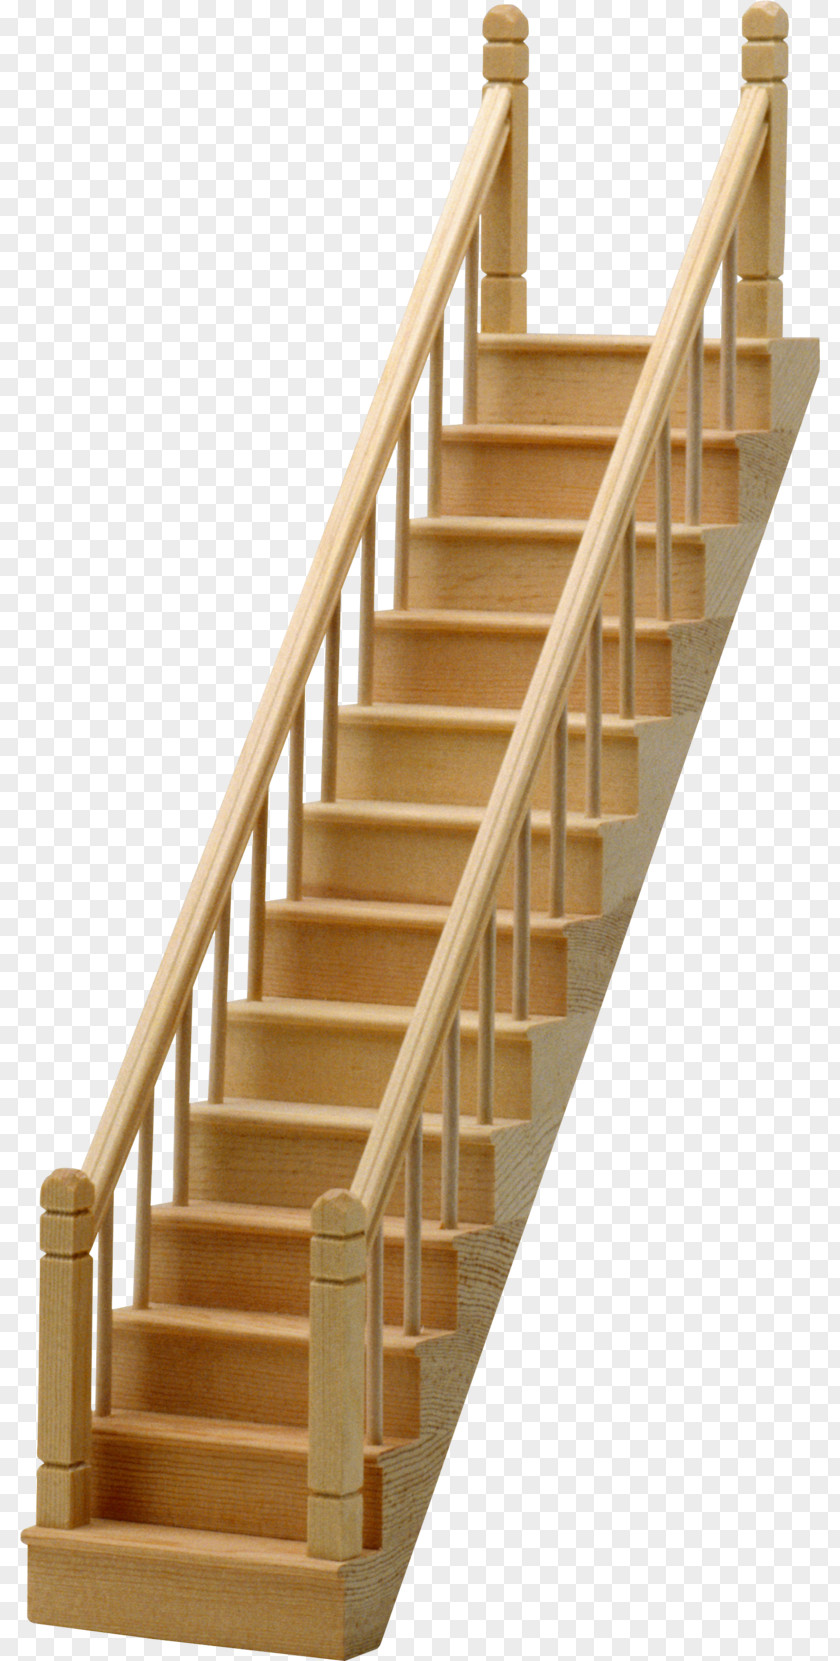 Ladder Staircases Handrail Baluster Architecture PNG